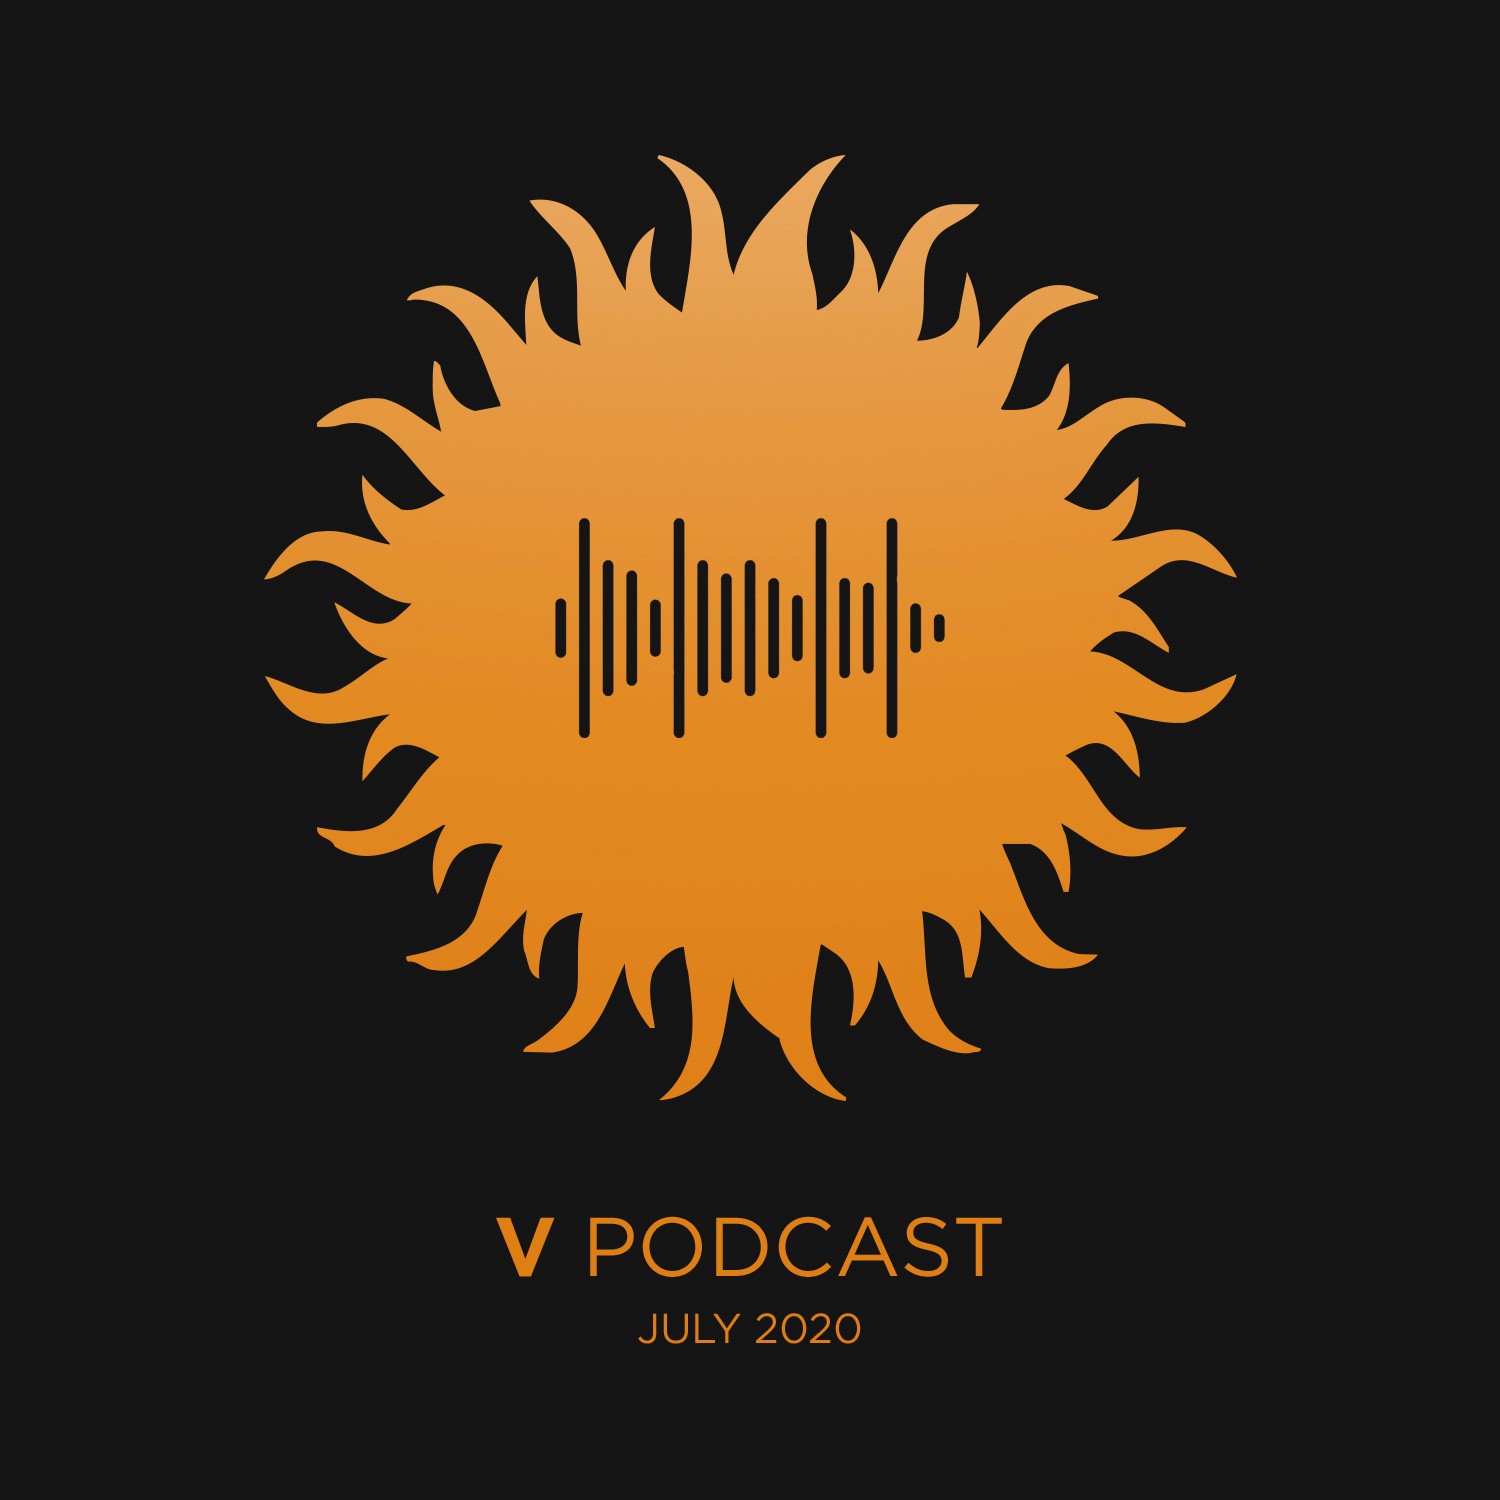 V Podcast 093 - Drum and Bass - hosted by Bryan Gee Artwork